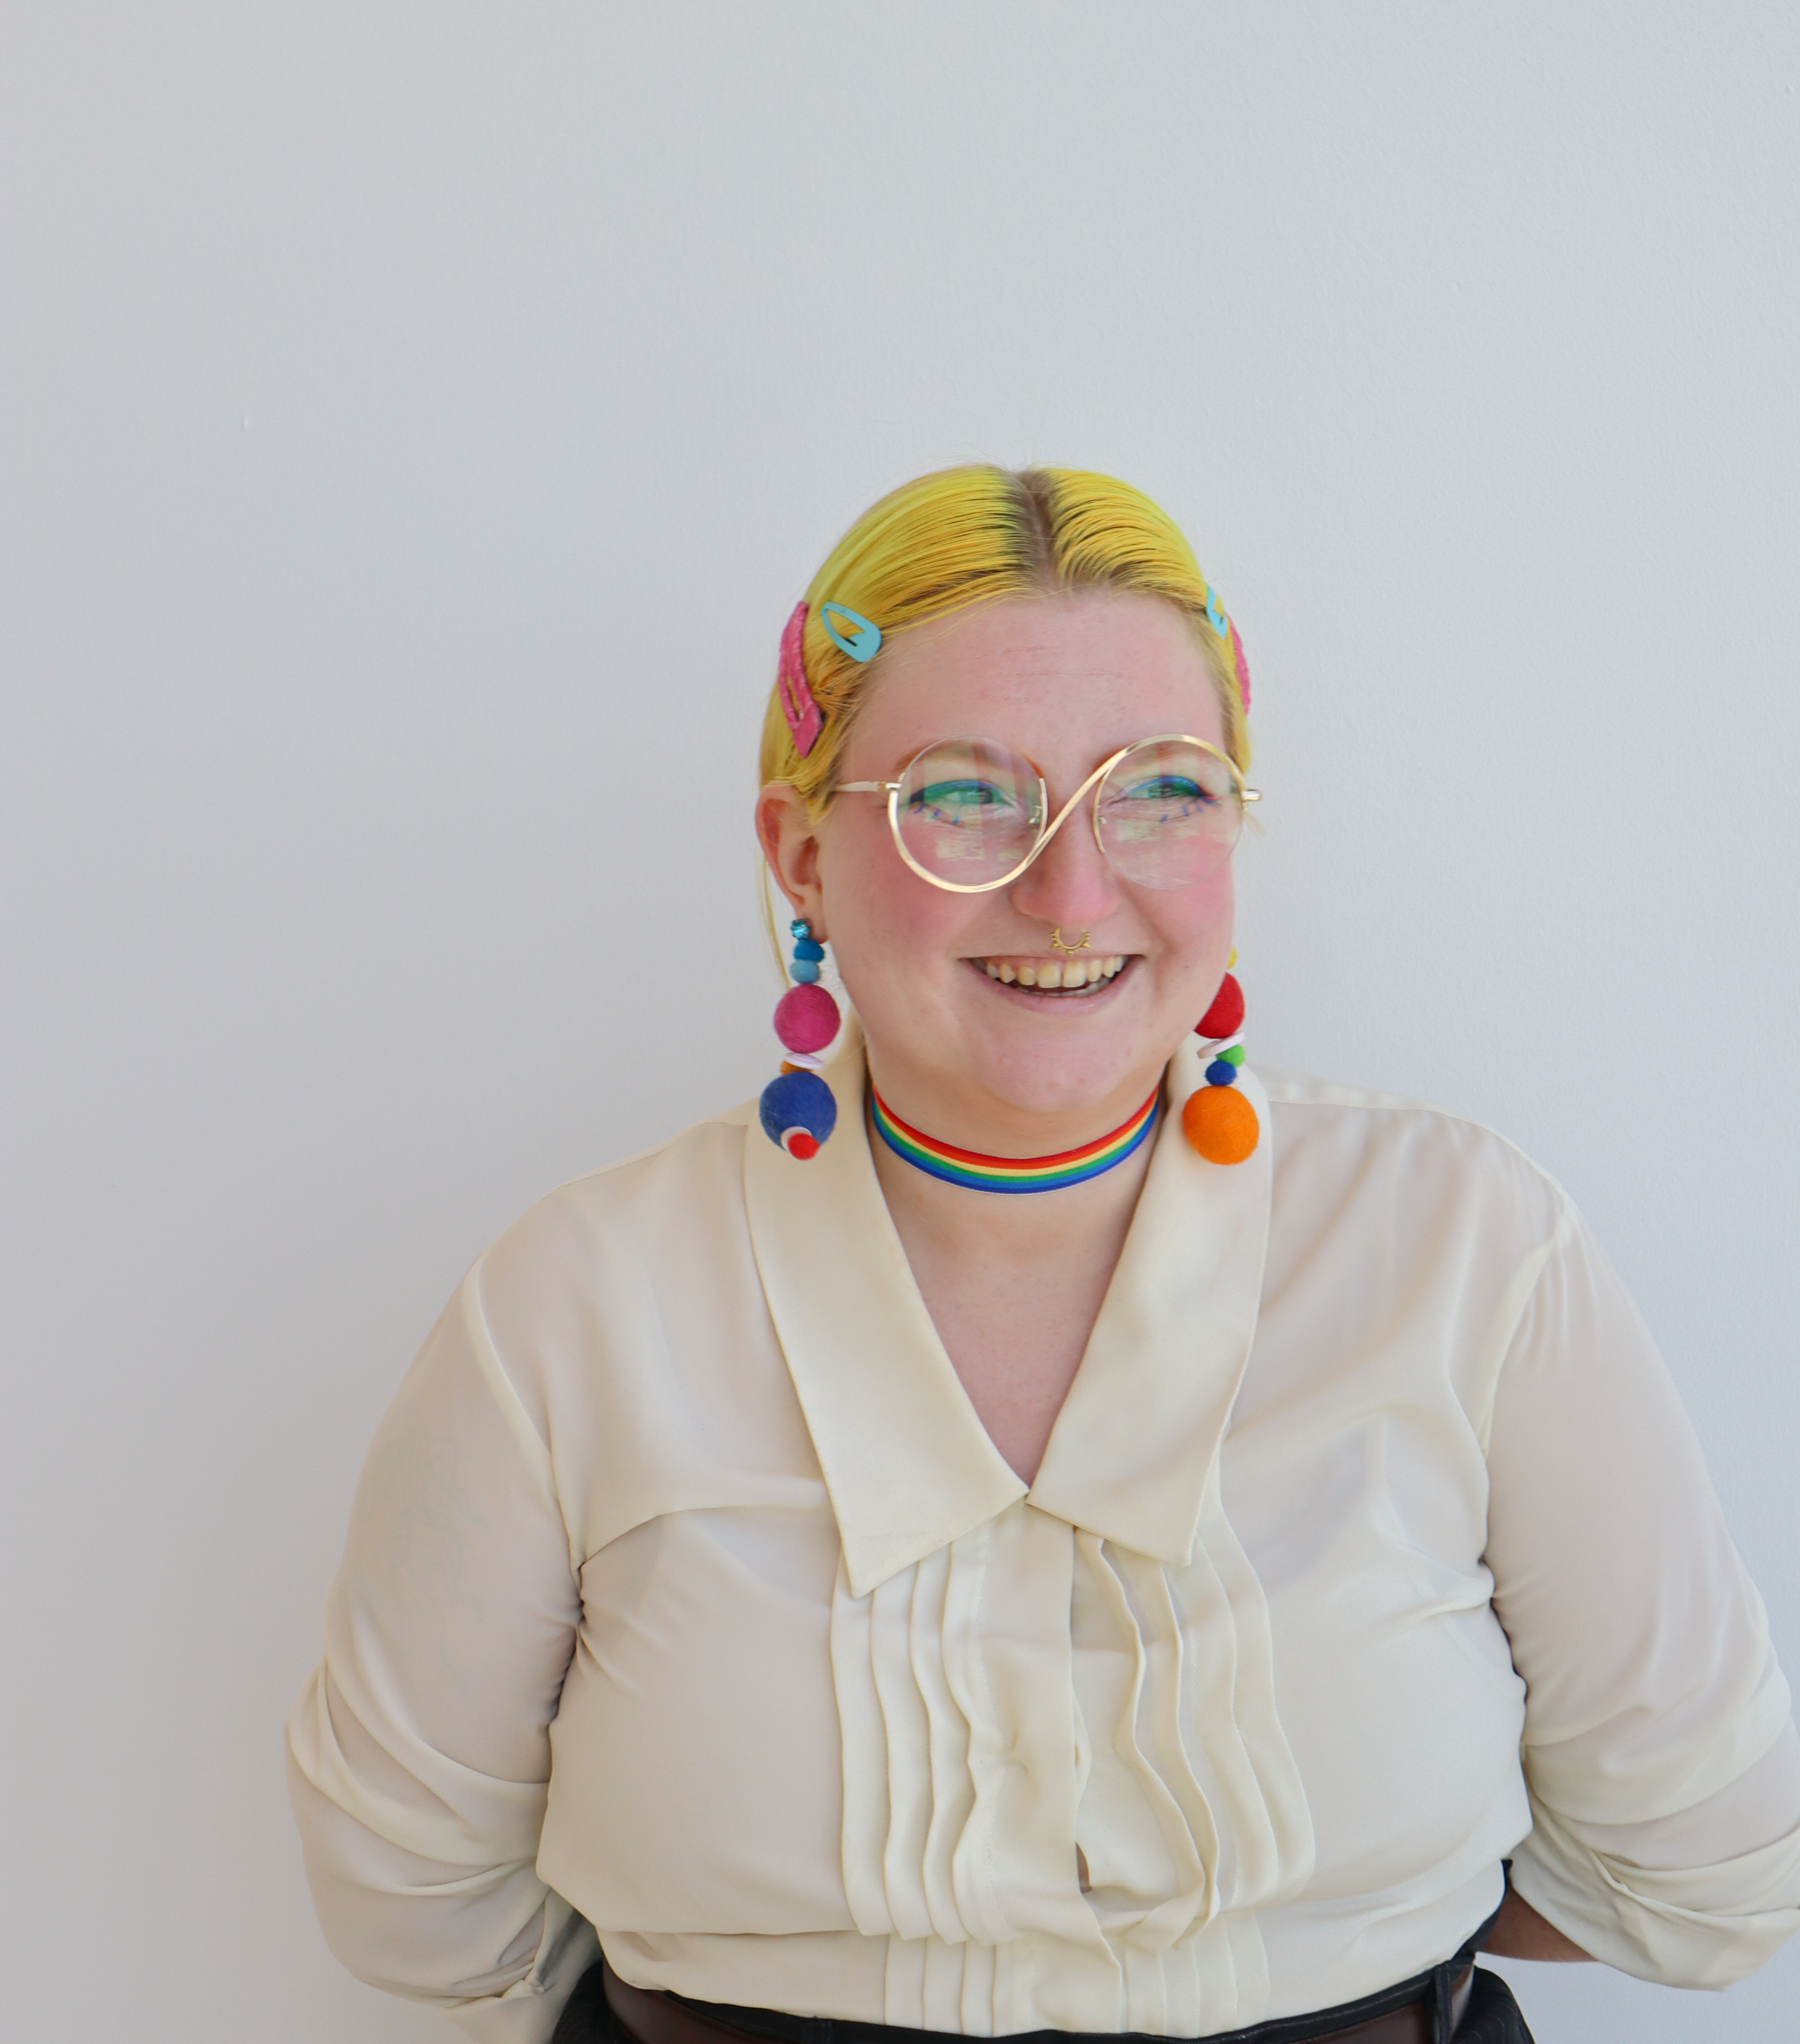 A white person with bright yellow hair and colorful makeup smiles, looking to the side They are dressed in an off-white blouse, with a rainbow choker necklace and colorful pom-pom earrings.